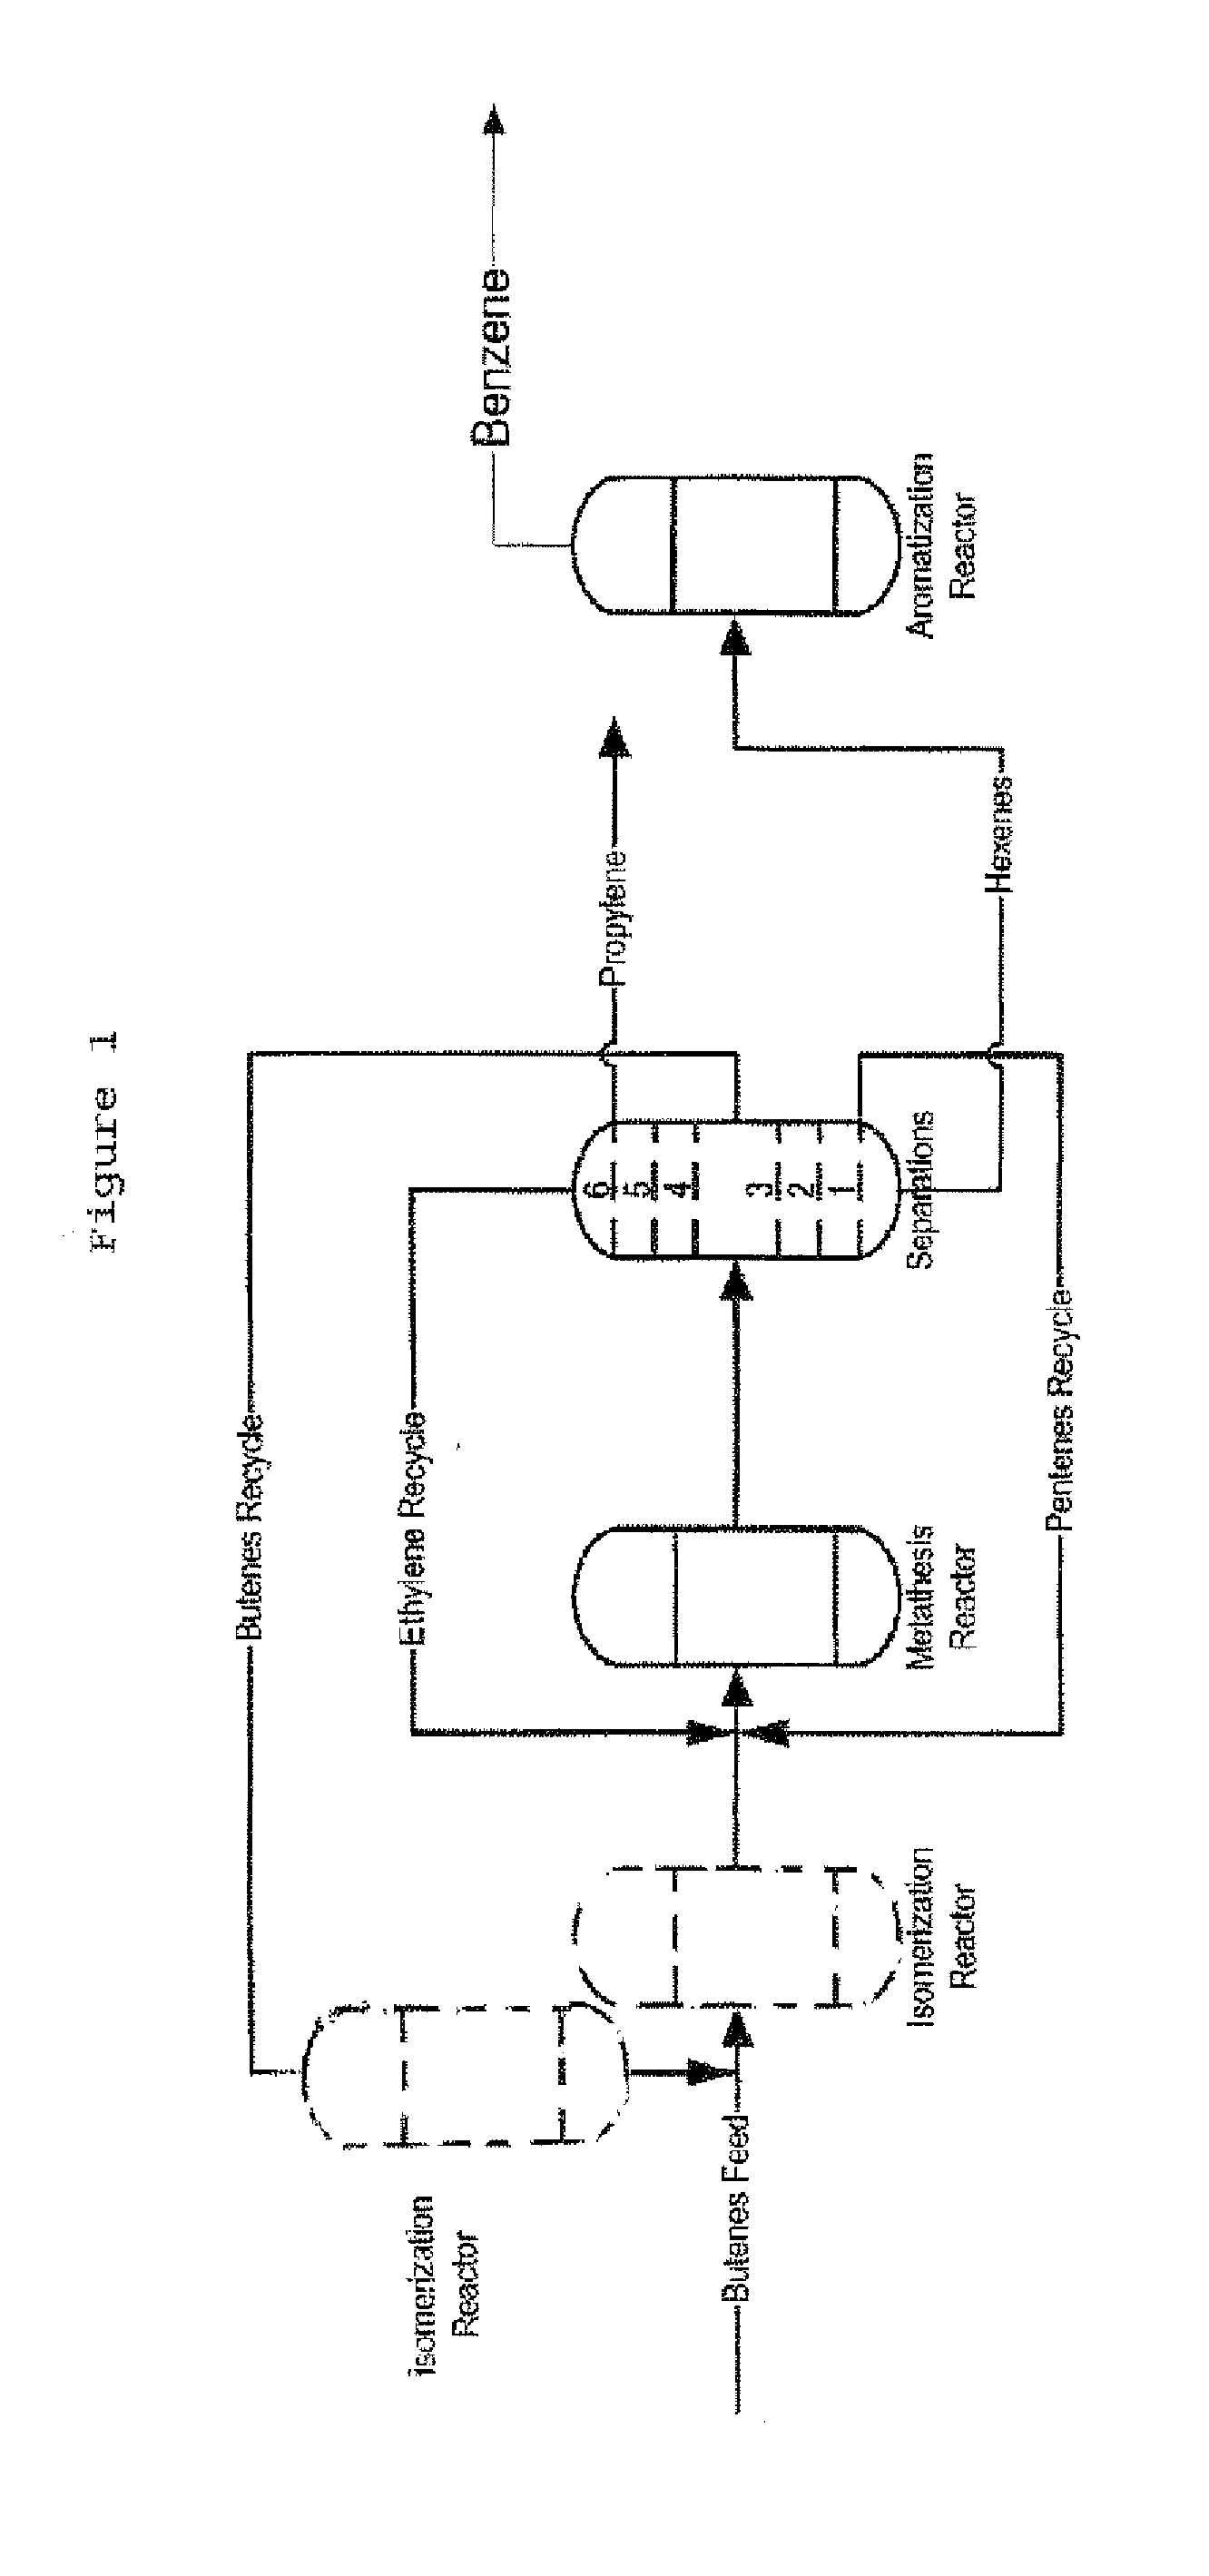 Process for Producing Propylene and Aromatics from Butenes by Metathesis and Aromatization